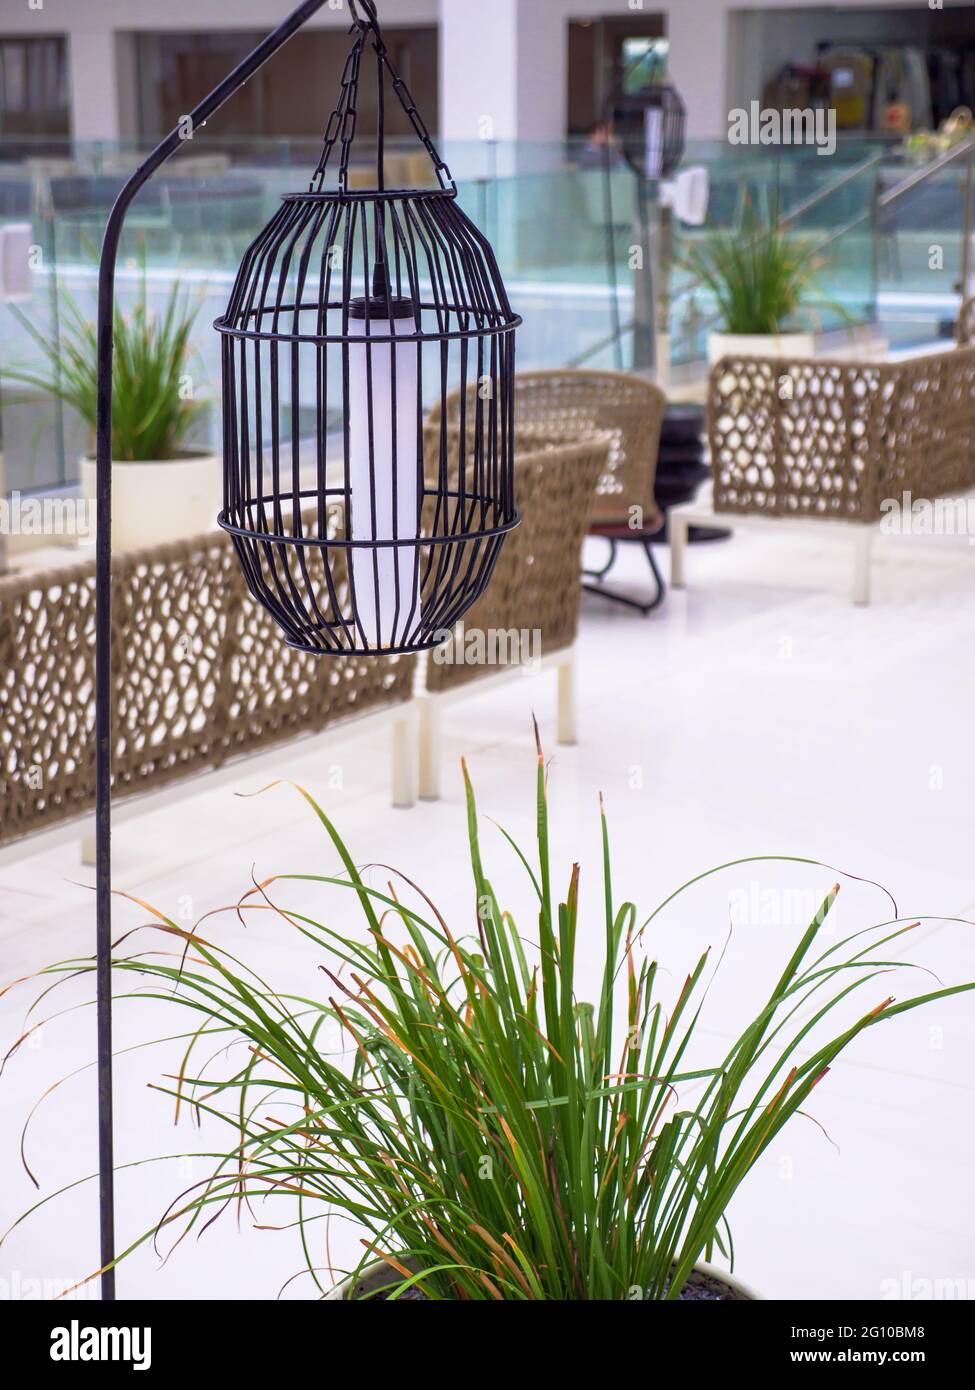 High black metal grid lantern hanging near the empty rattan wicket brown chairs without people standing on an empty hotel terrace after the rain. Stock Photo